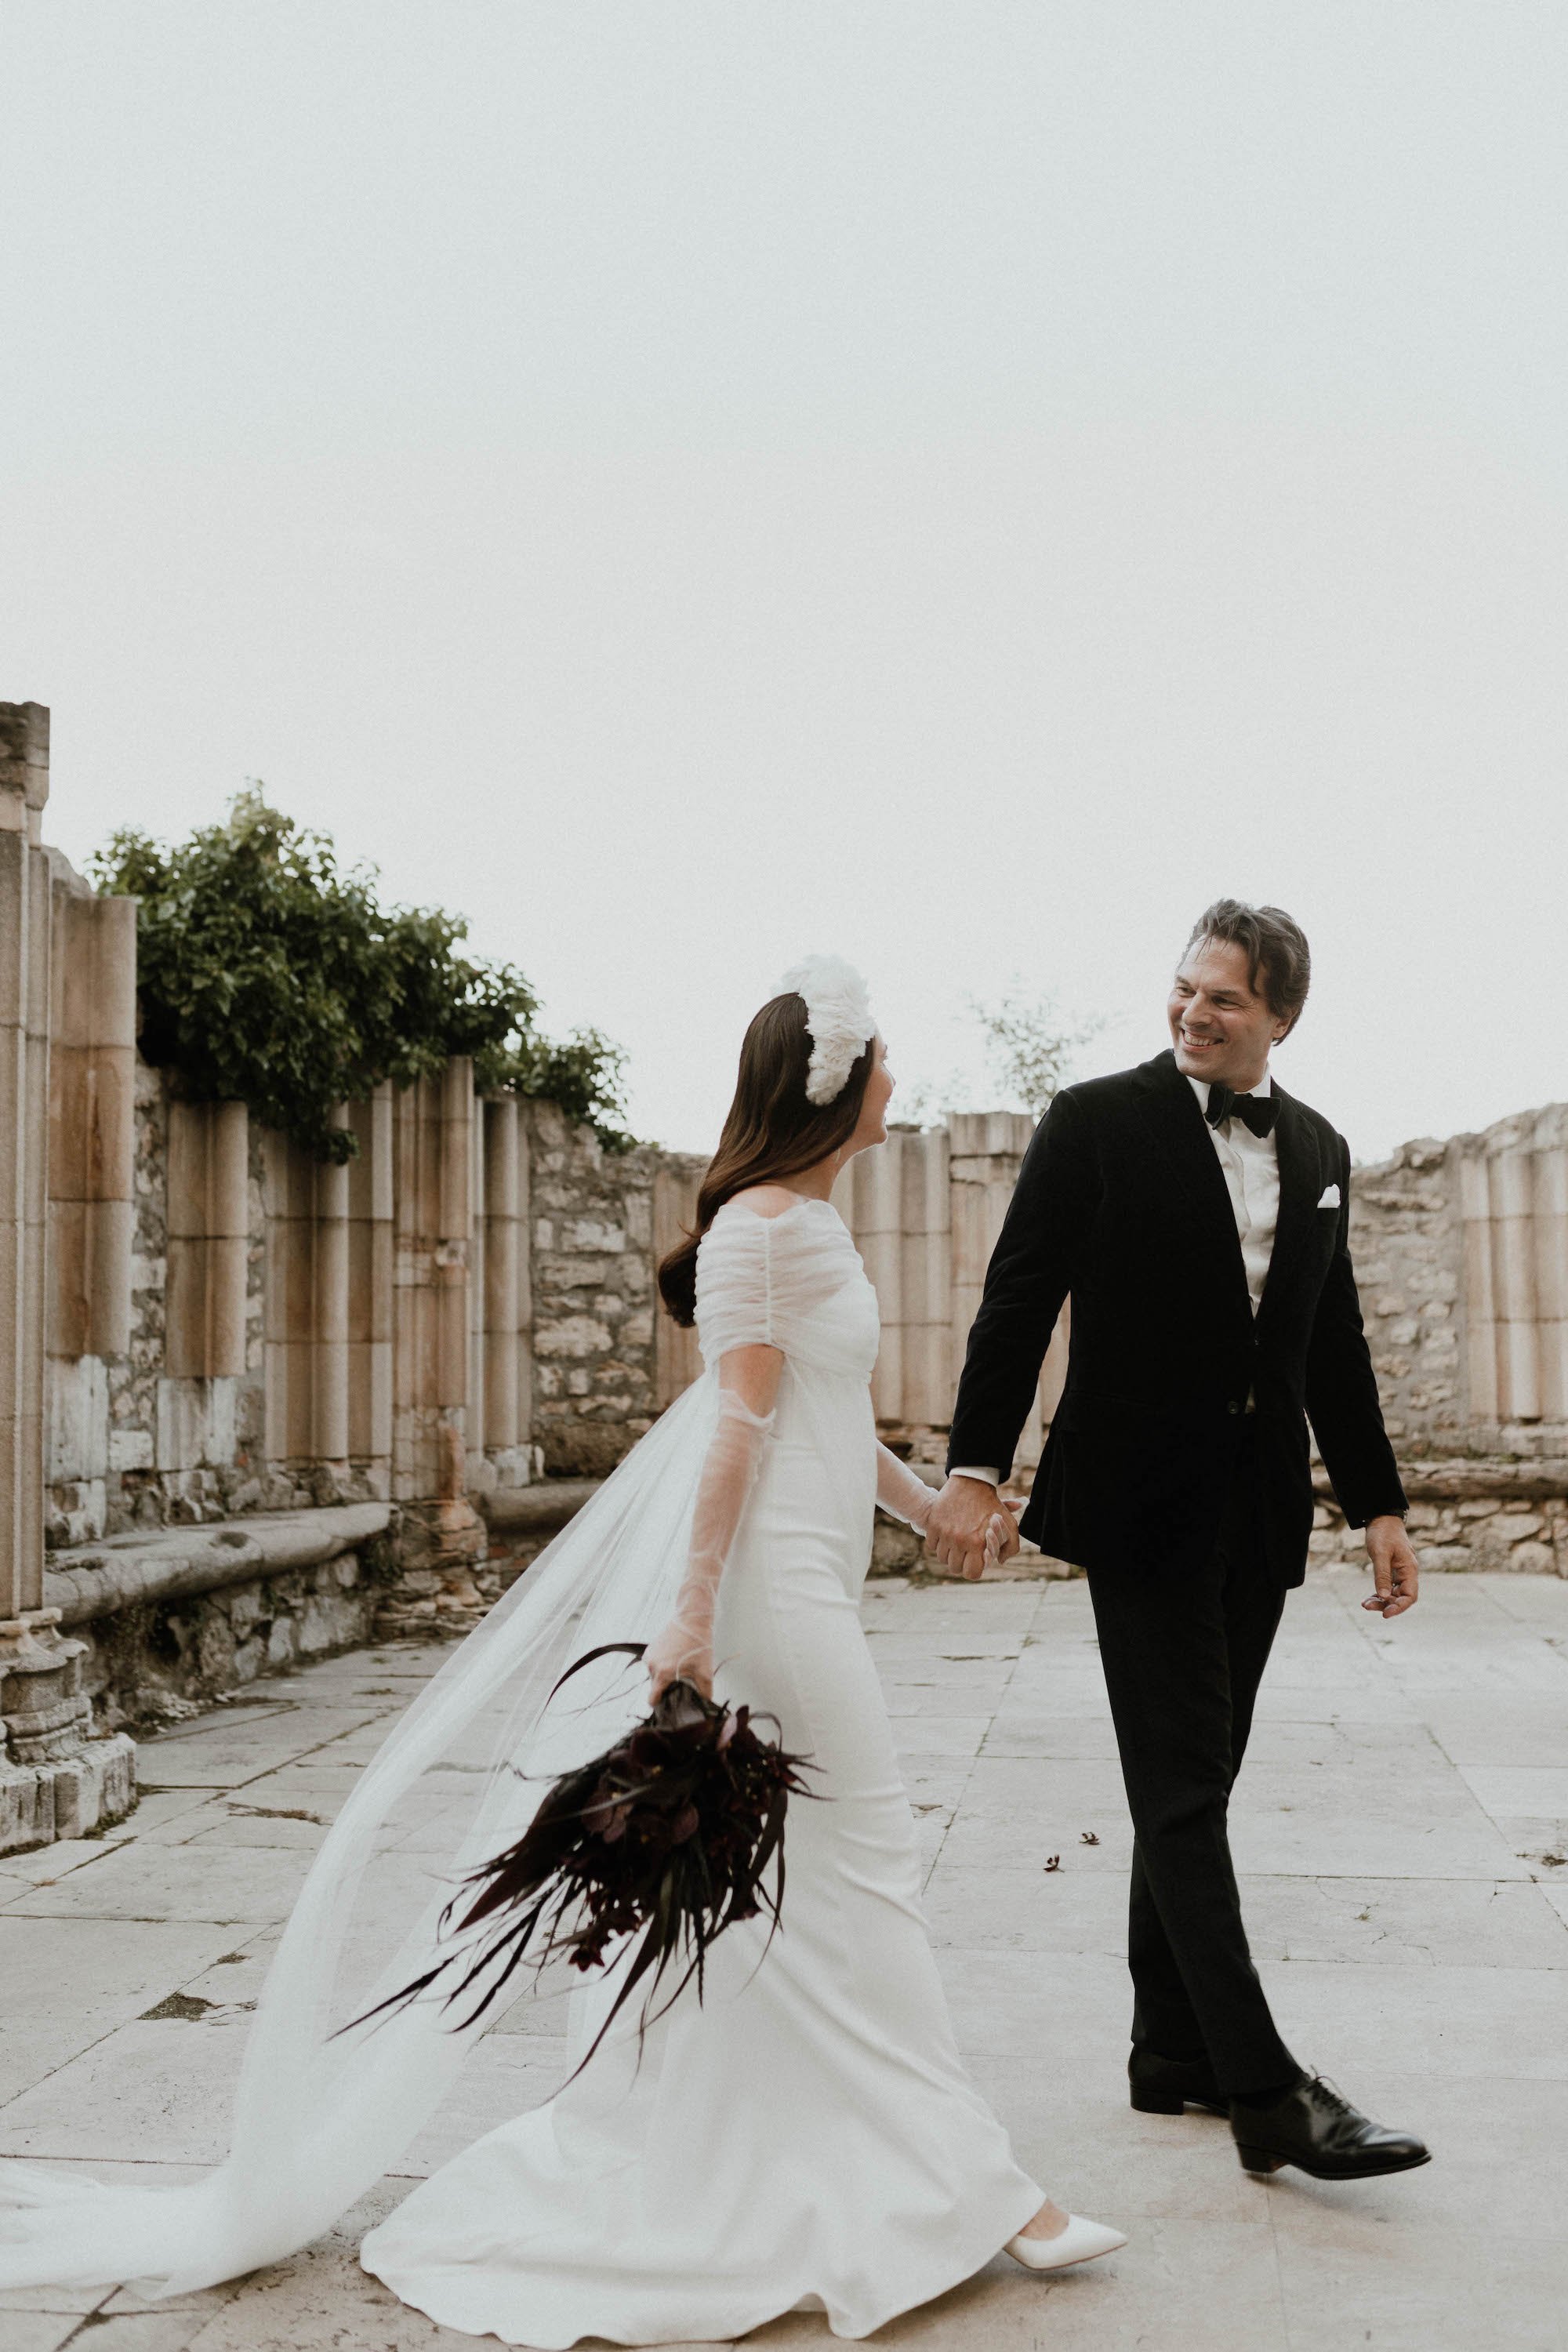 Beautiful bride Zsuzsa wore the Oliver Dress, Manet cape and Ariel bow | Wedding dress by Halfpenny London